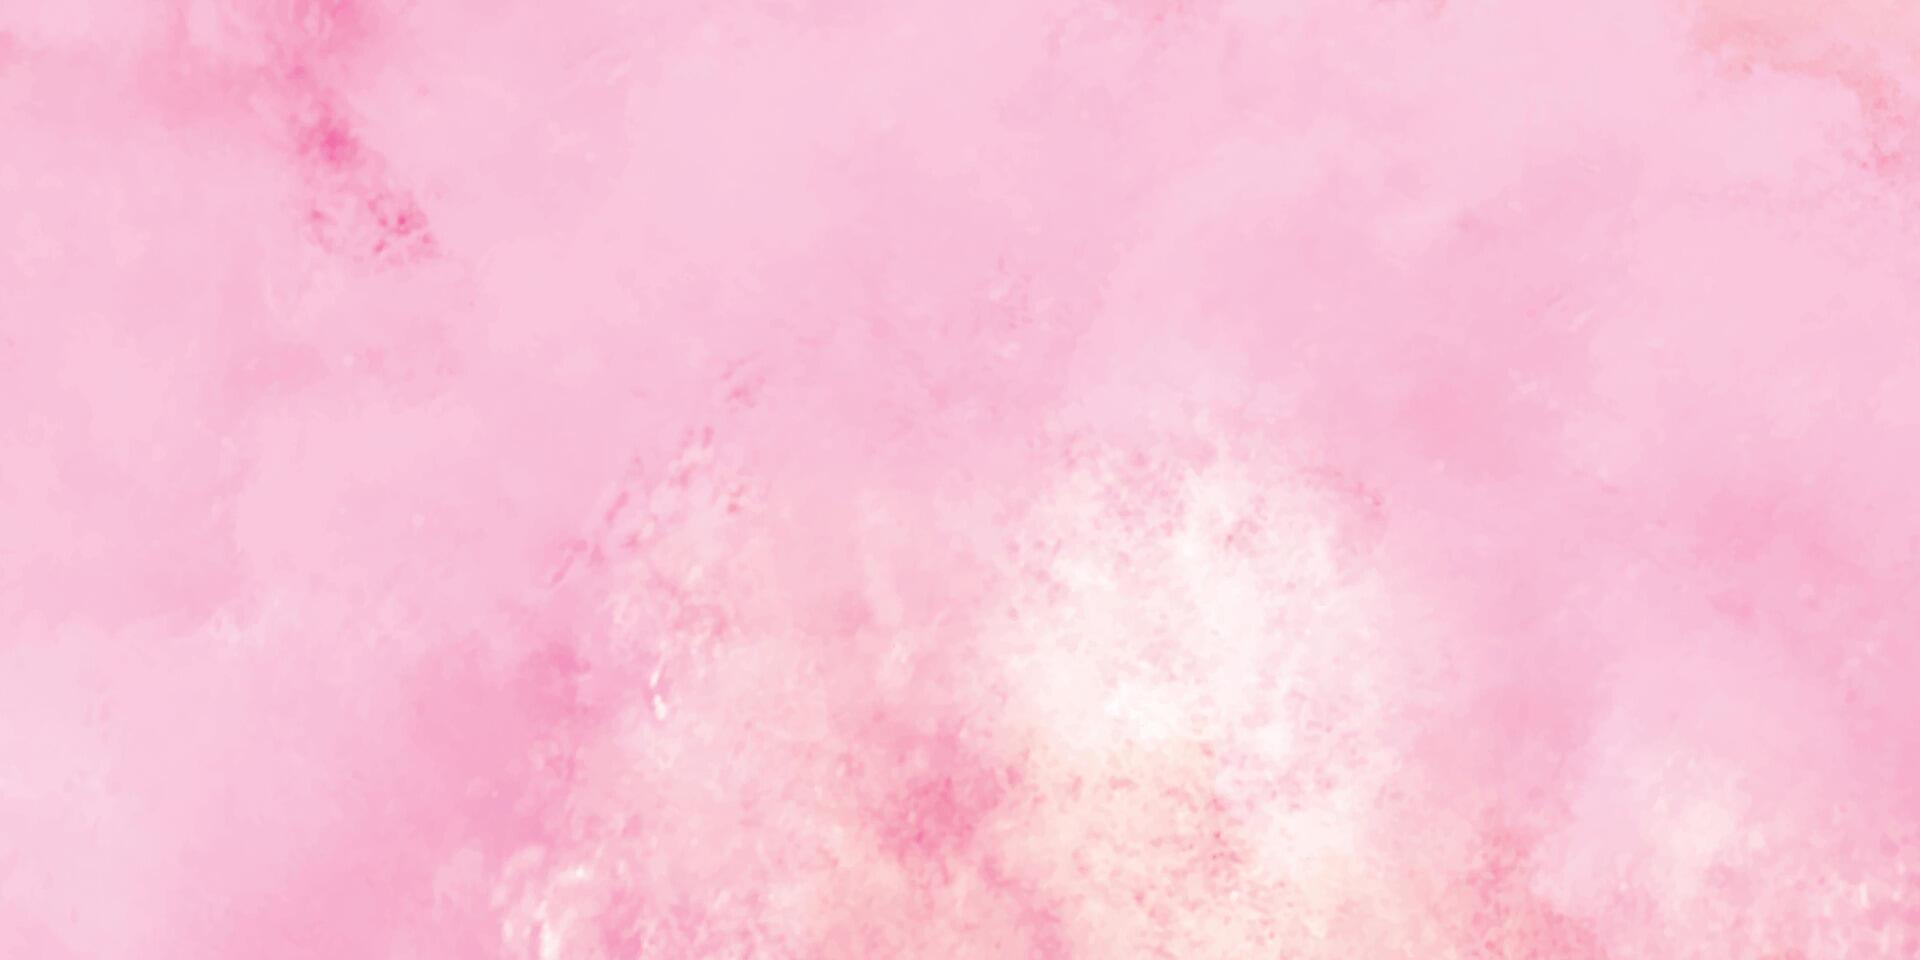 Abstract watercolor pink texture with splashes. Watercolor background with space. Soft pink watercolor grunge texture background. vector